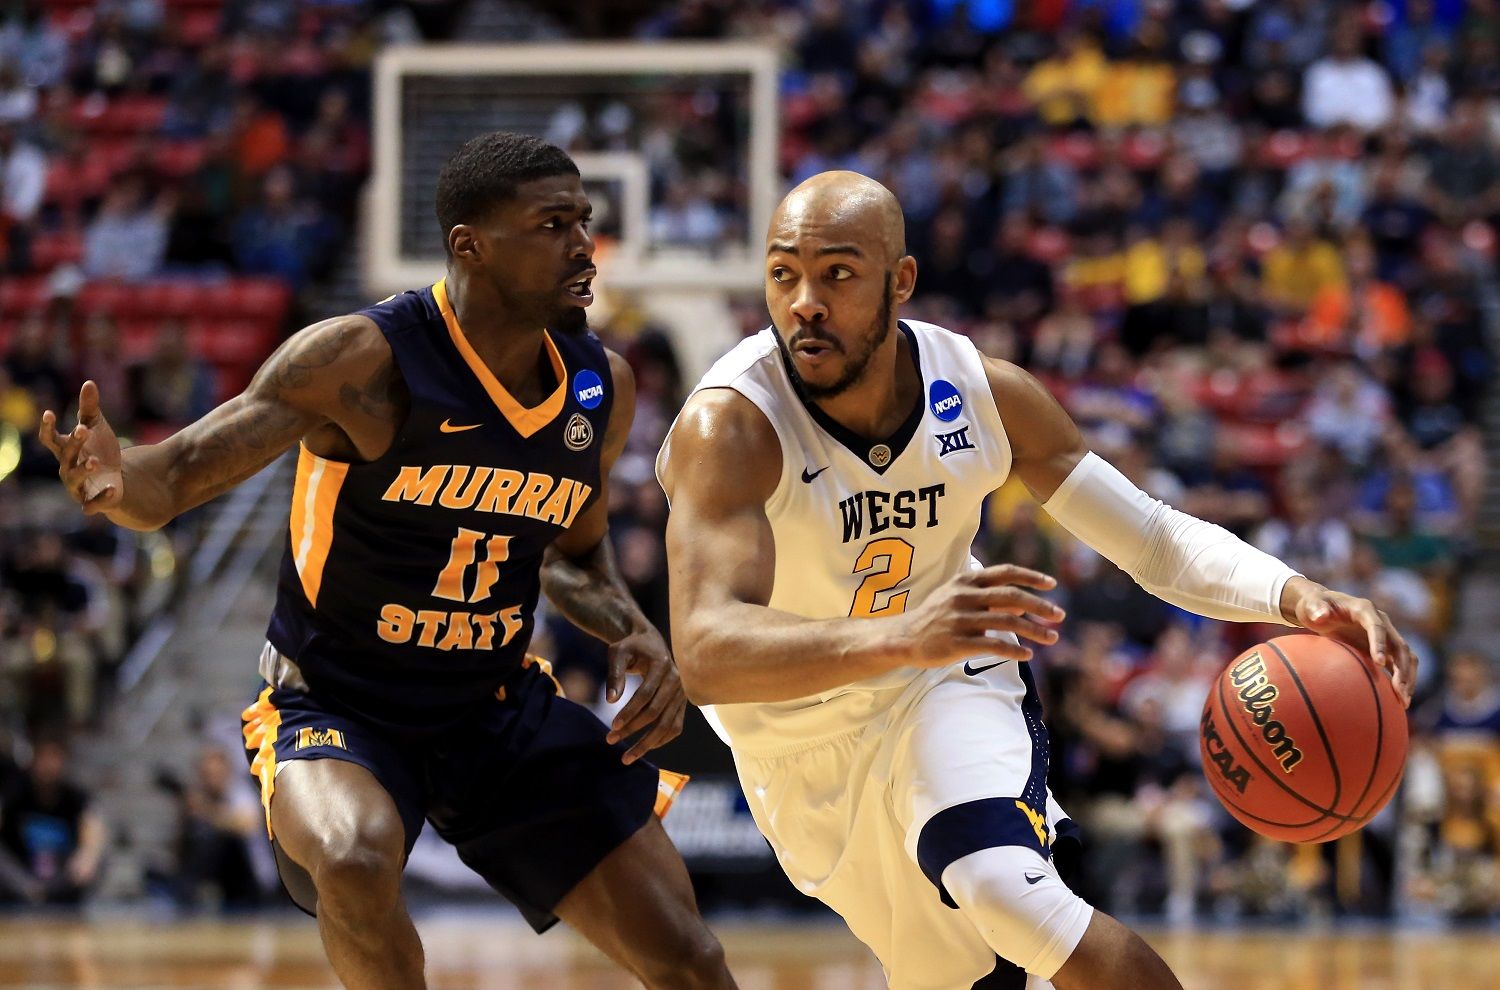 SAN DIEGO, CA - MARCH 16:  Jevon Carter #2 of the West Virginia Mountaineers handles the ball against Shaq Buchanan #11 of the Murray State Racers in the first half during the first round of the 2018 NCAA Men's Basketball Tournament at Viejas Arena on March 16, 2018 in San Diego, California.  (Photo by Sean M. Haffey/Getty Images)